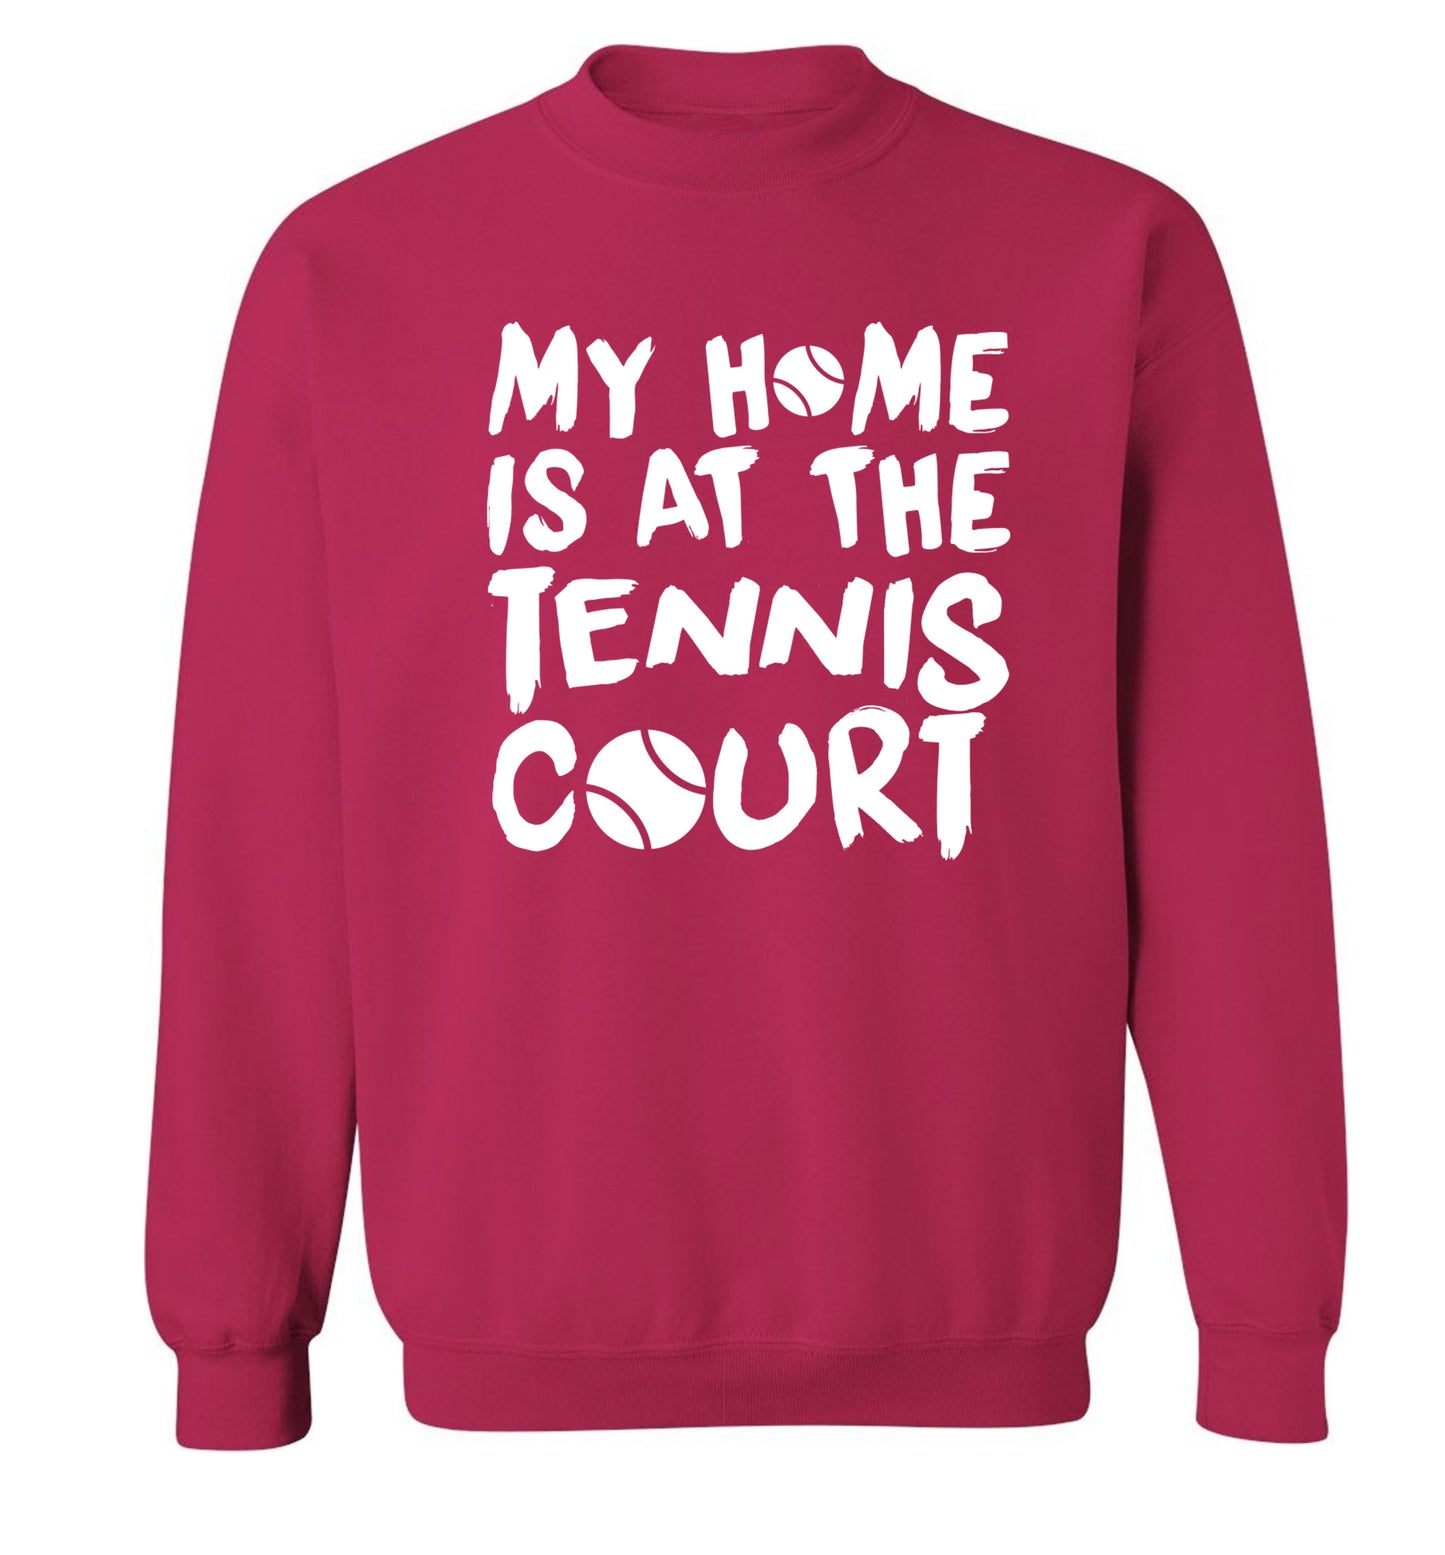 My home is at the tennis court Adult's unisex pink Sweater 2XL